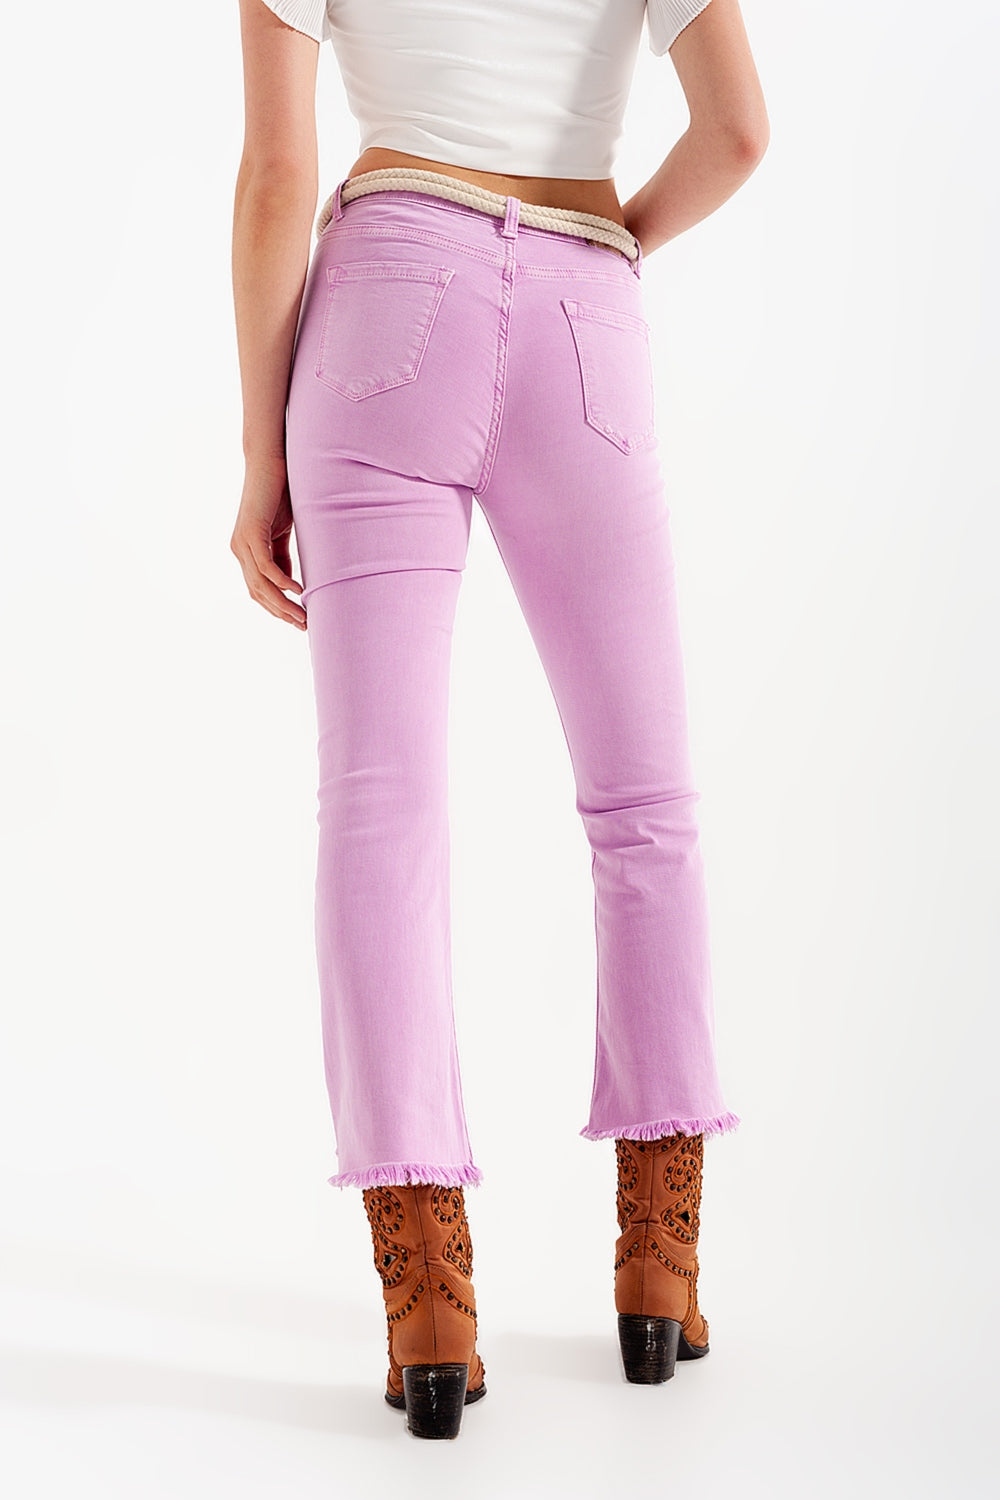 Straight Pants in pink with wide ankles Szua Store